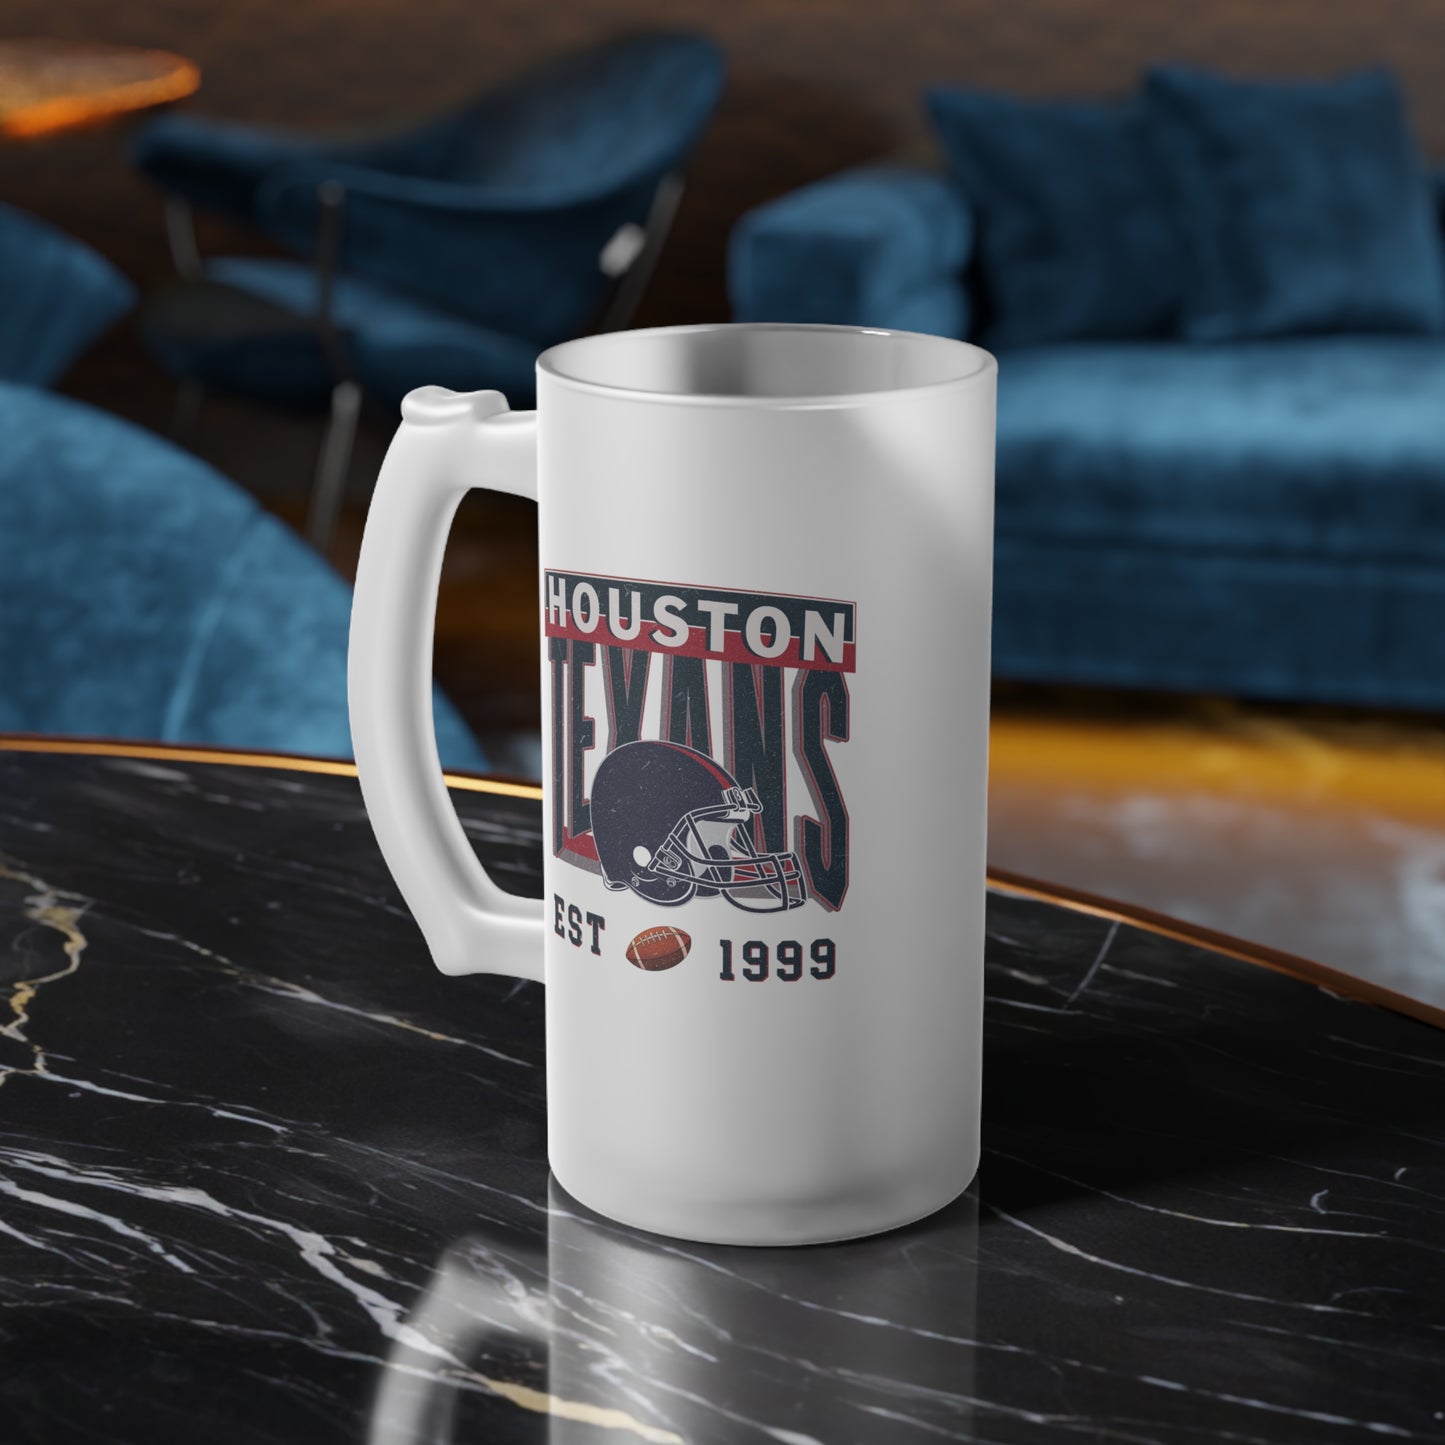 Houston Football Frosted Glass Beer Mug